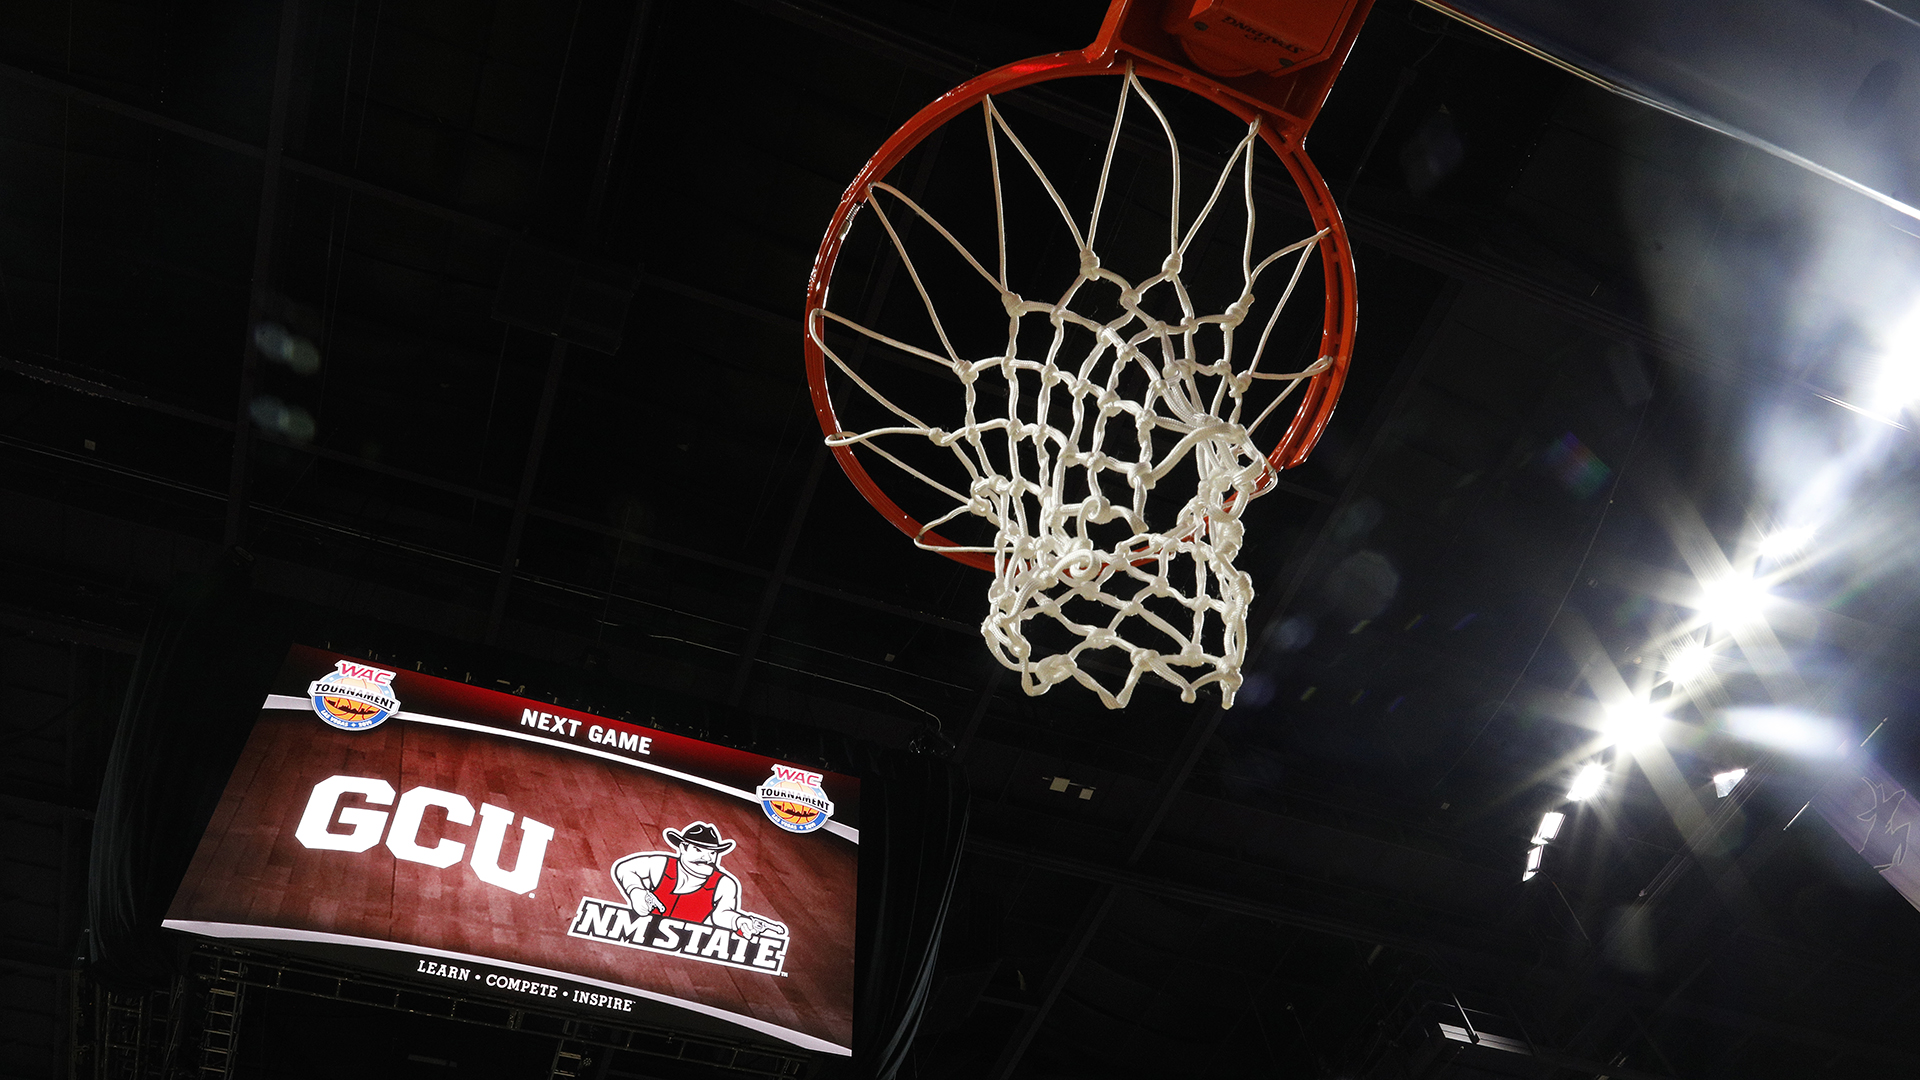 The basketball hoops are shown before the championship game of the Western Athletic Conference basketball tournament between the Grand Canyon Lopes and the New Mexico State Aggies at the Orleans Arena on March 16, 2019 in Las Vegas, Nevada.